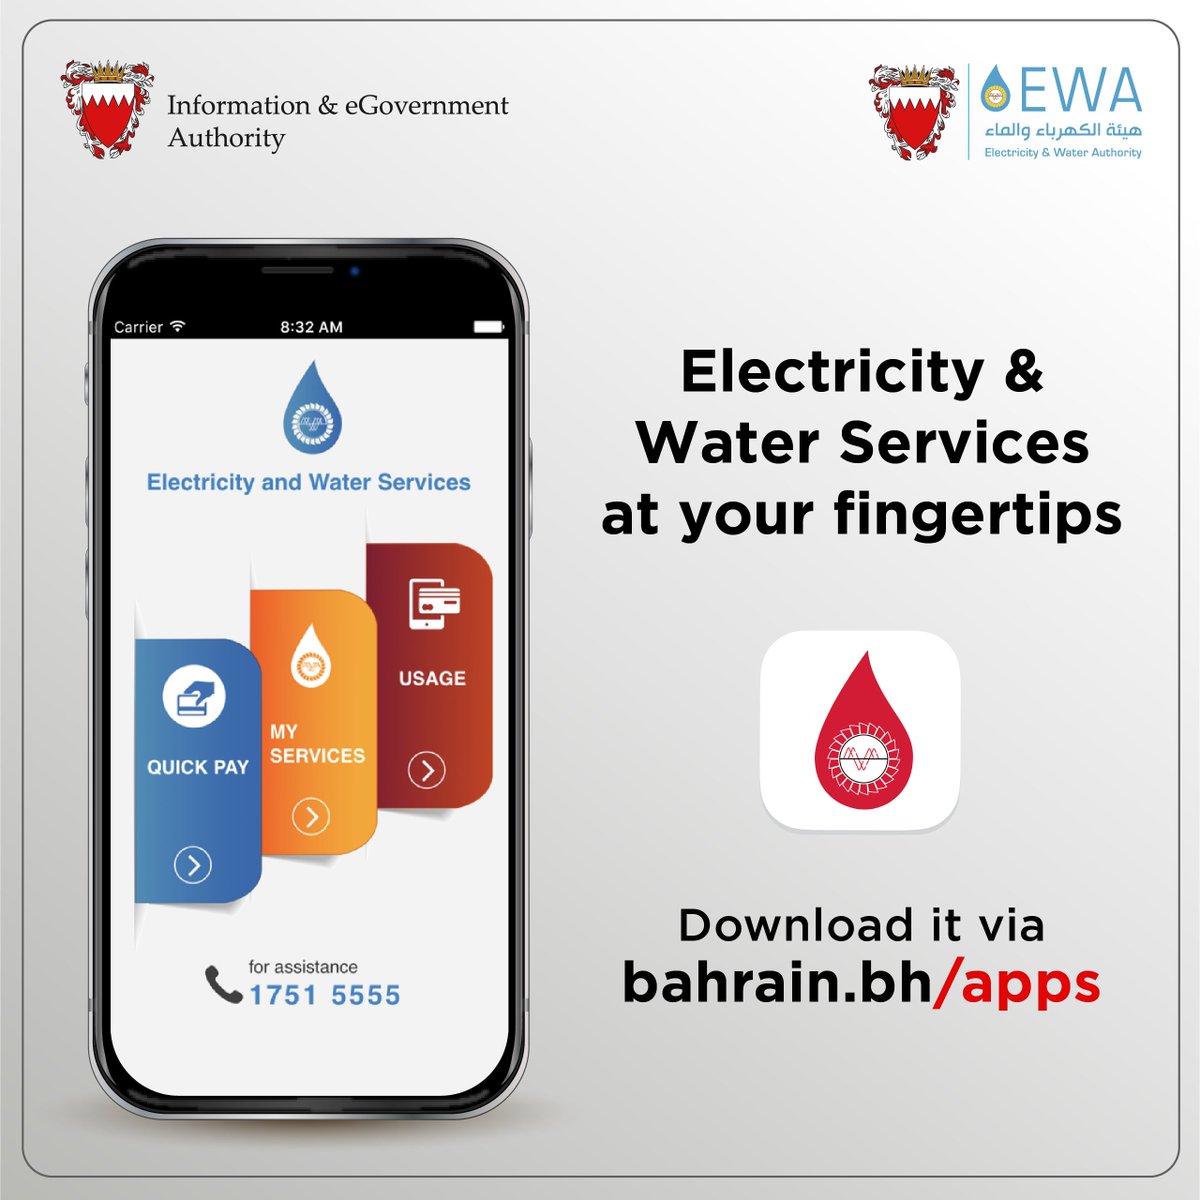 Keep Track of your monthly bill, usage history and more via Electricity& Water Services app 🚰💡
 
Download the app
bahrain.bh/apps
 
#act_to_save
#Bahrain #eGovernment #ewa #Electercity #water #towardsabetterlife #GoDigital #DigitalTransformation #Digital #innovation